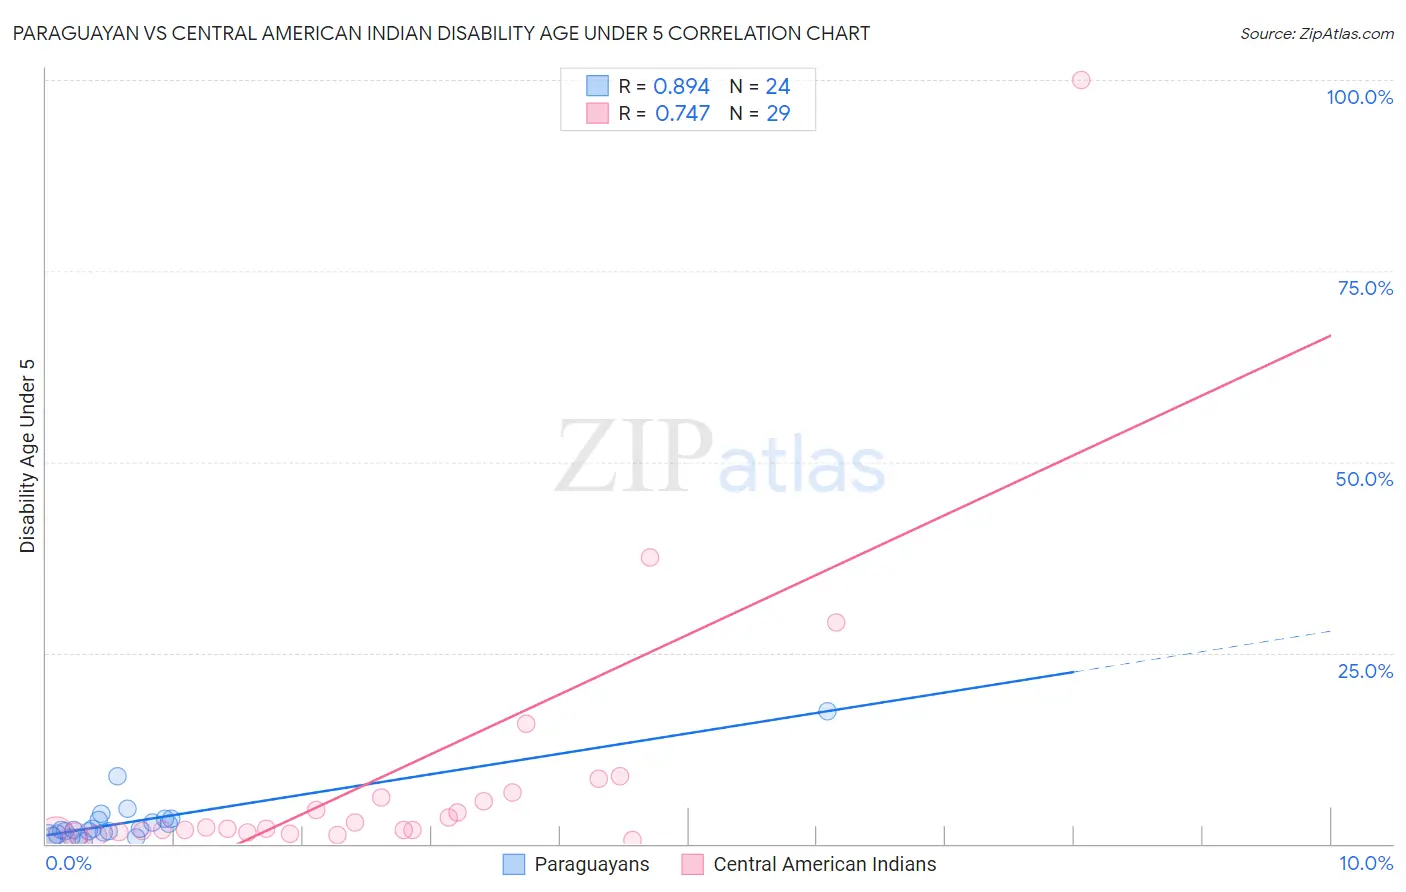 Paraguayan vs Central American Indian Disability Age Under 5